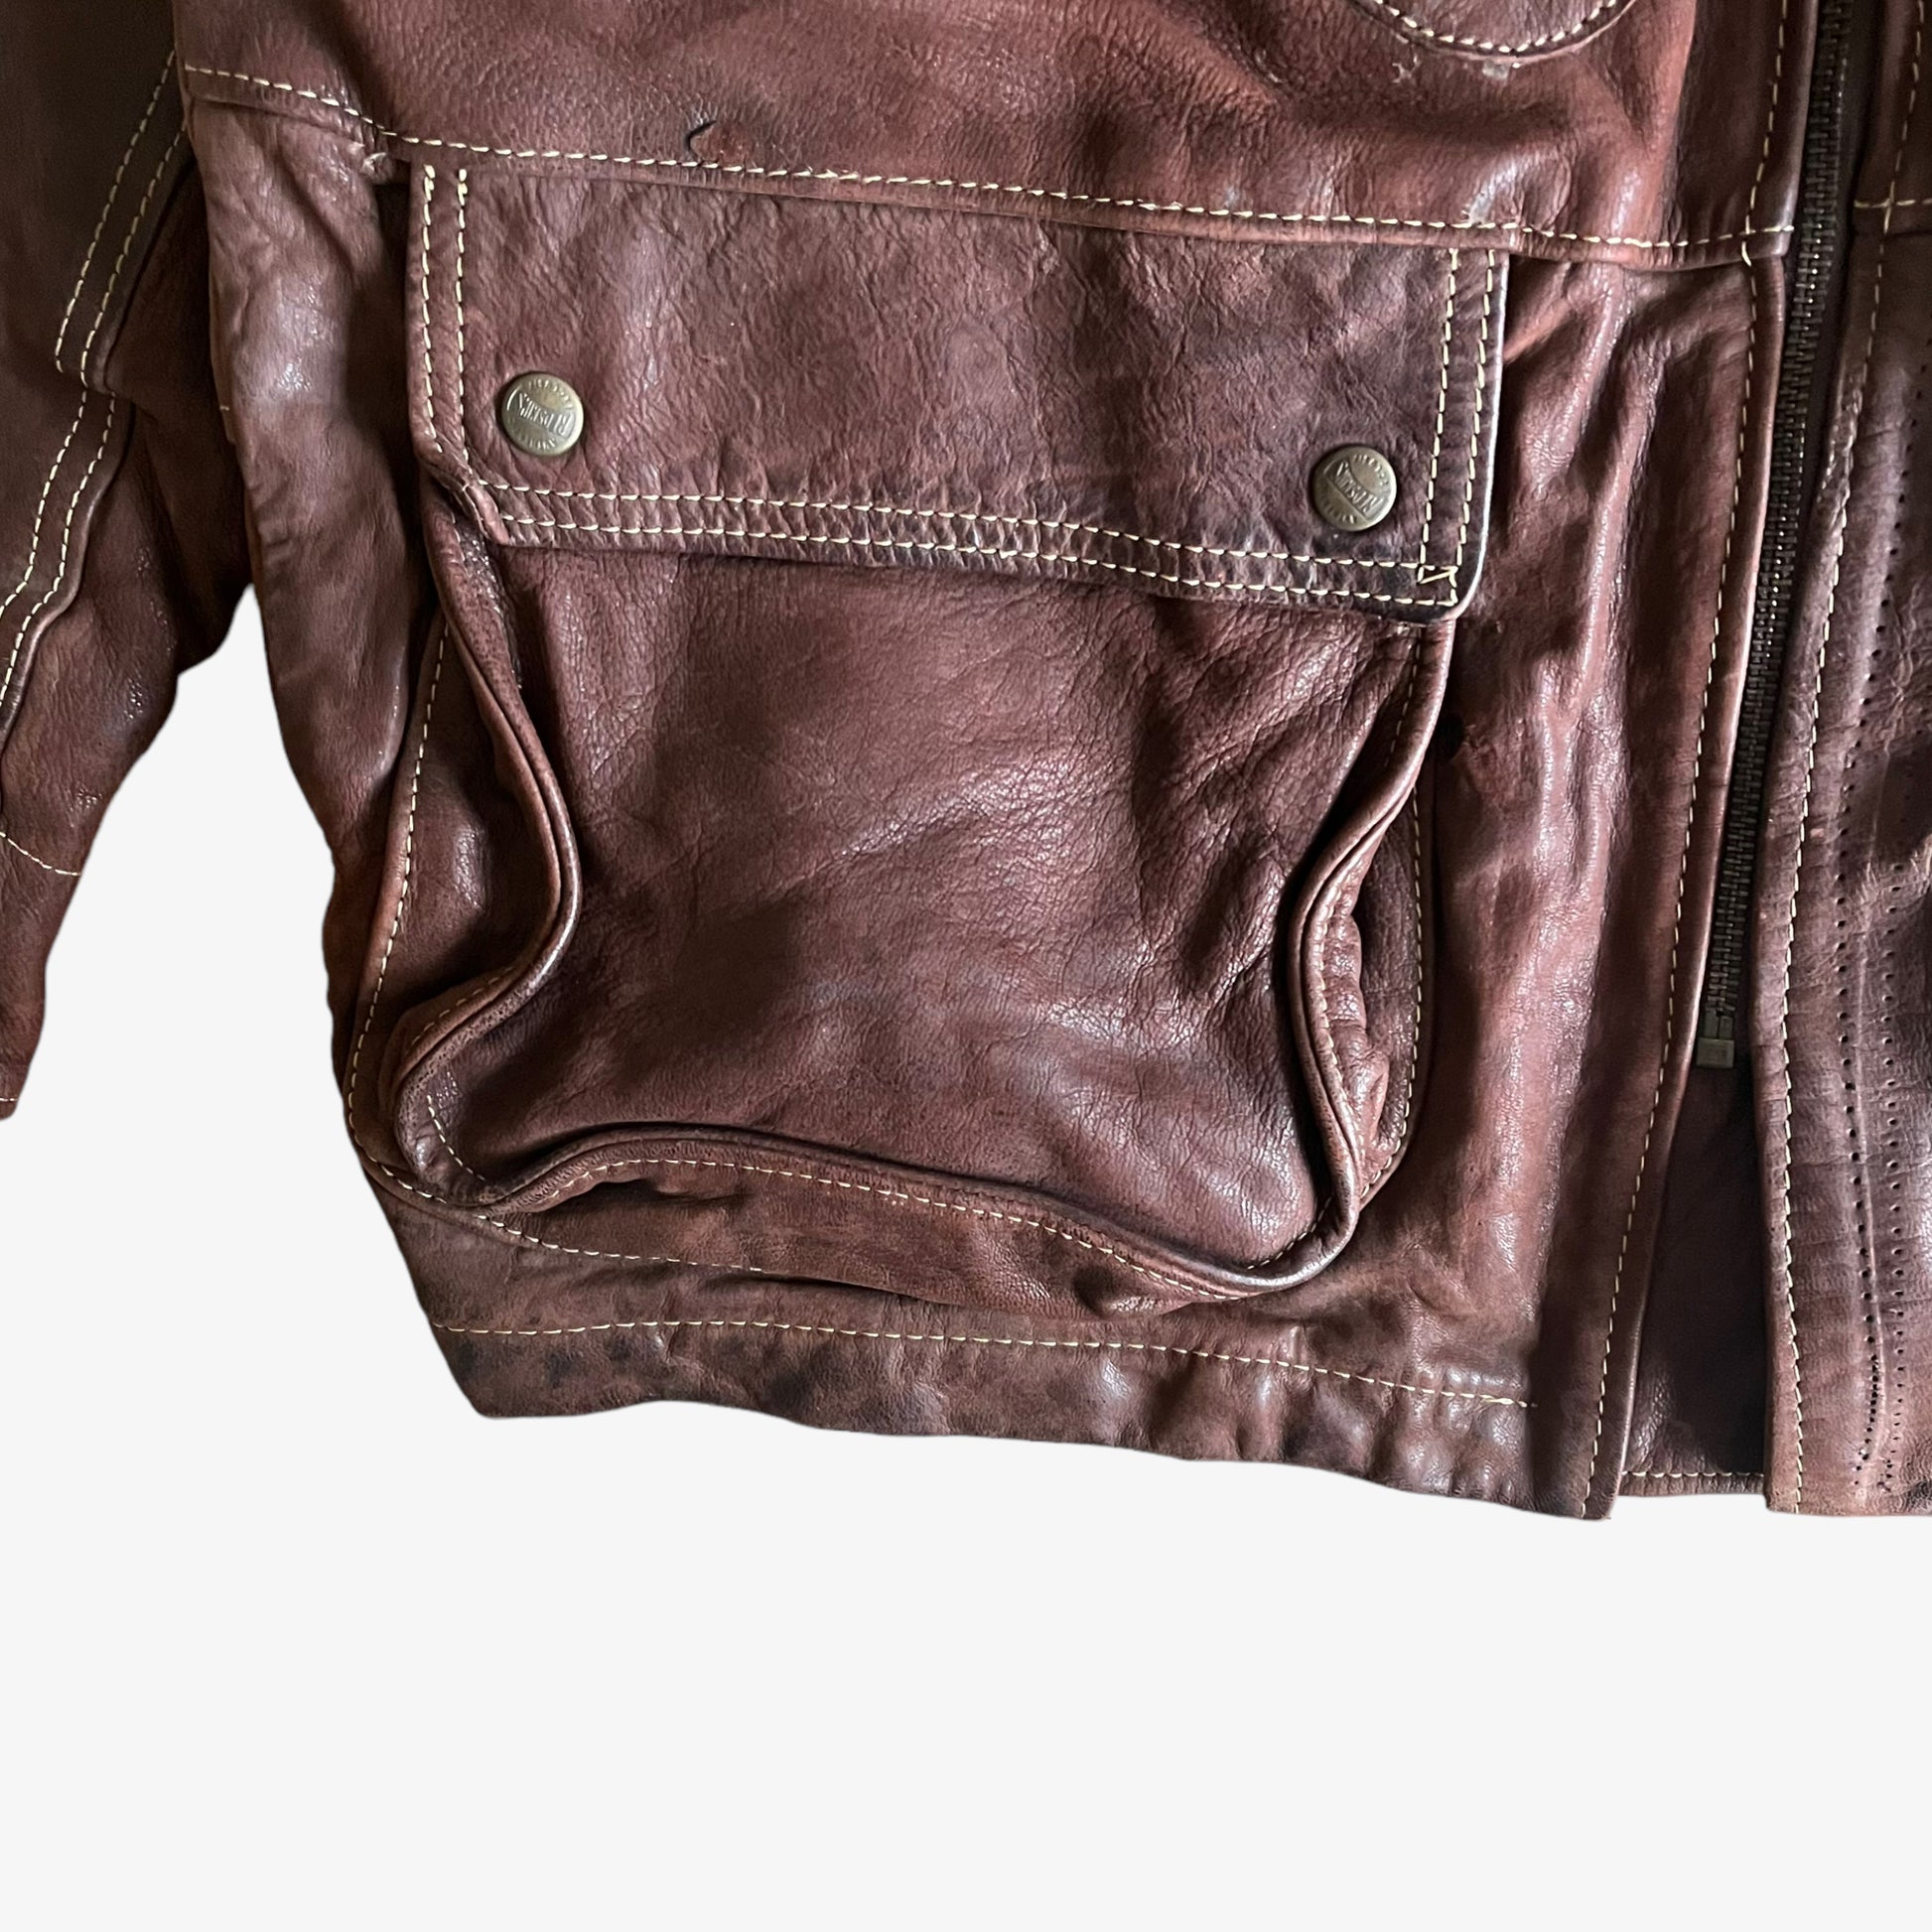 Vintage 90s Redskins Type B32 Leather Jacket With Front Spell Out Pocket - Casspios Dream